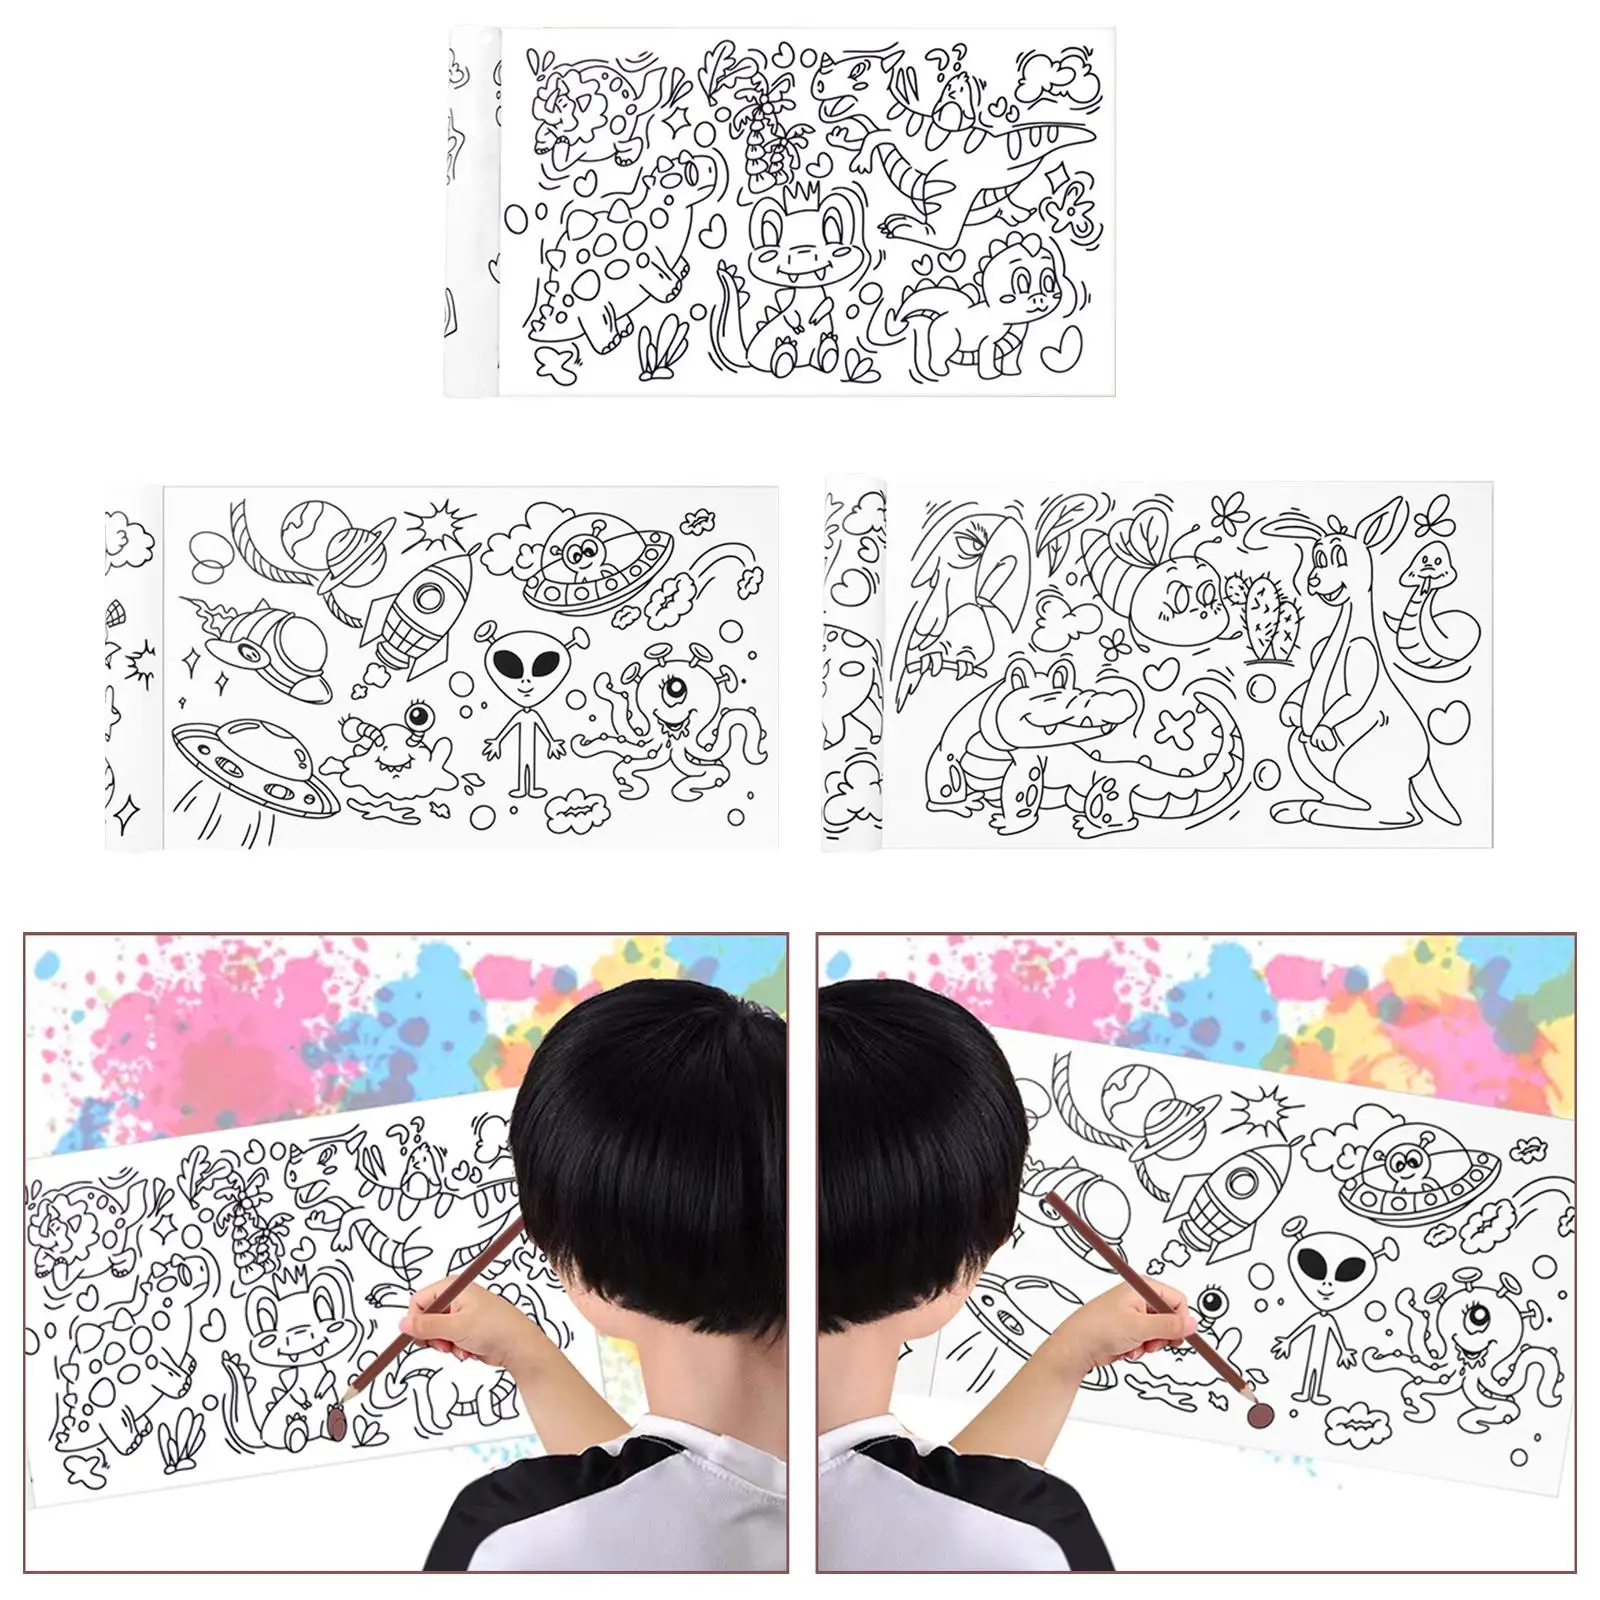 Children Coloring Roll Educational Toy Coloring Book Paper Poster DIY Art Supplies 30cmx300cm Rich Patterns Coloring Paper Roll